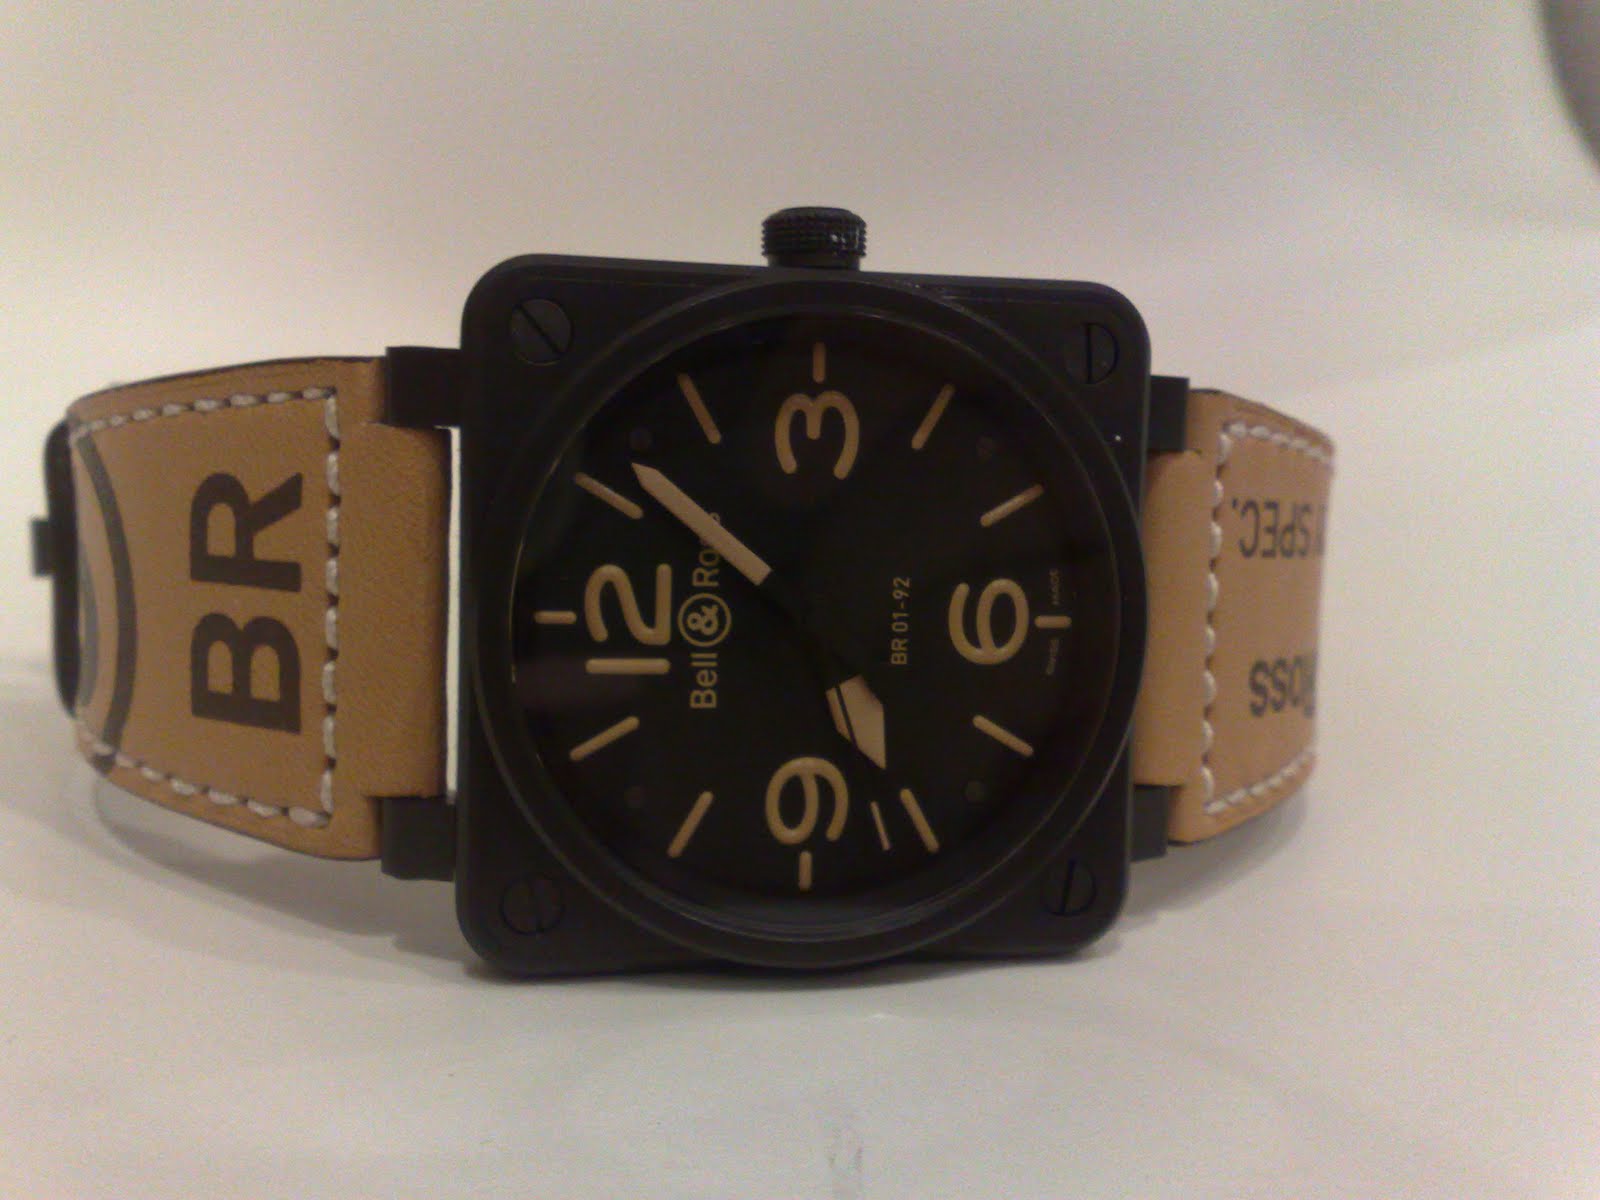 Affordable Alternative/Homage to Bell & Ross Heritage (PVD BR-01) |  WatchUSeek Watch Forums